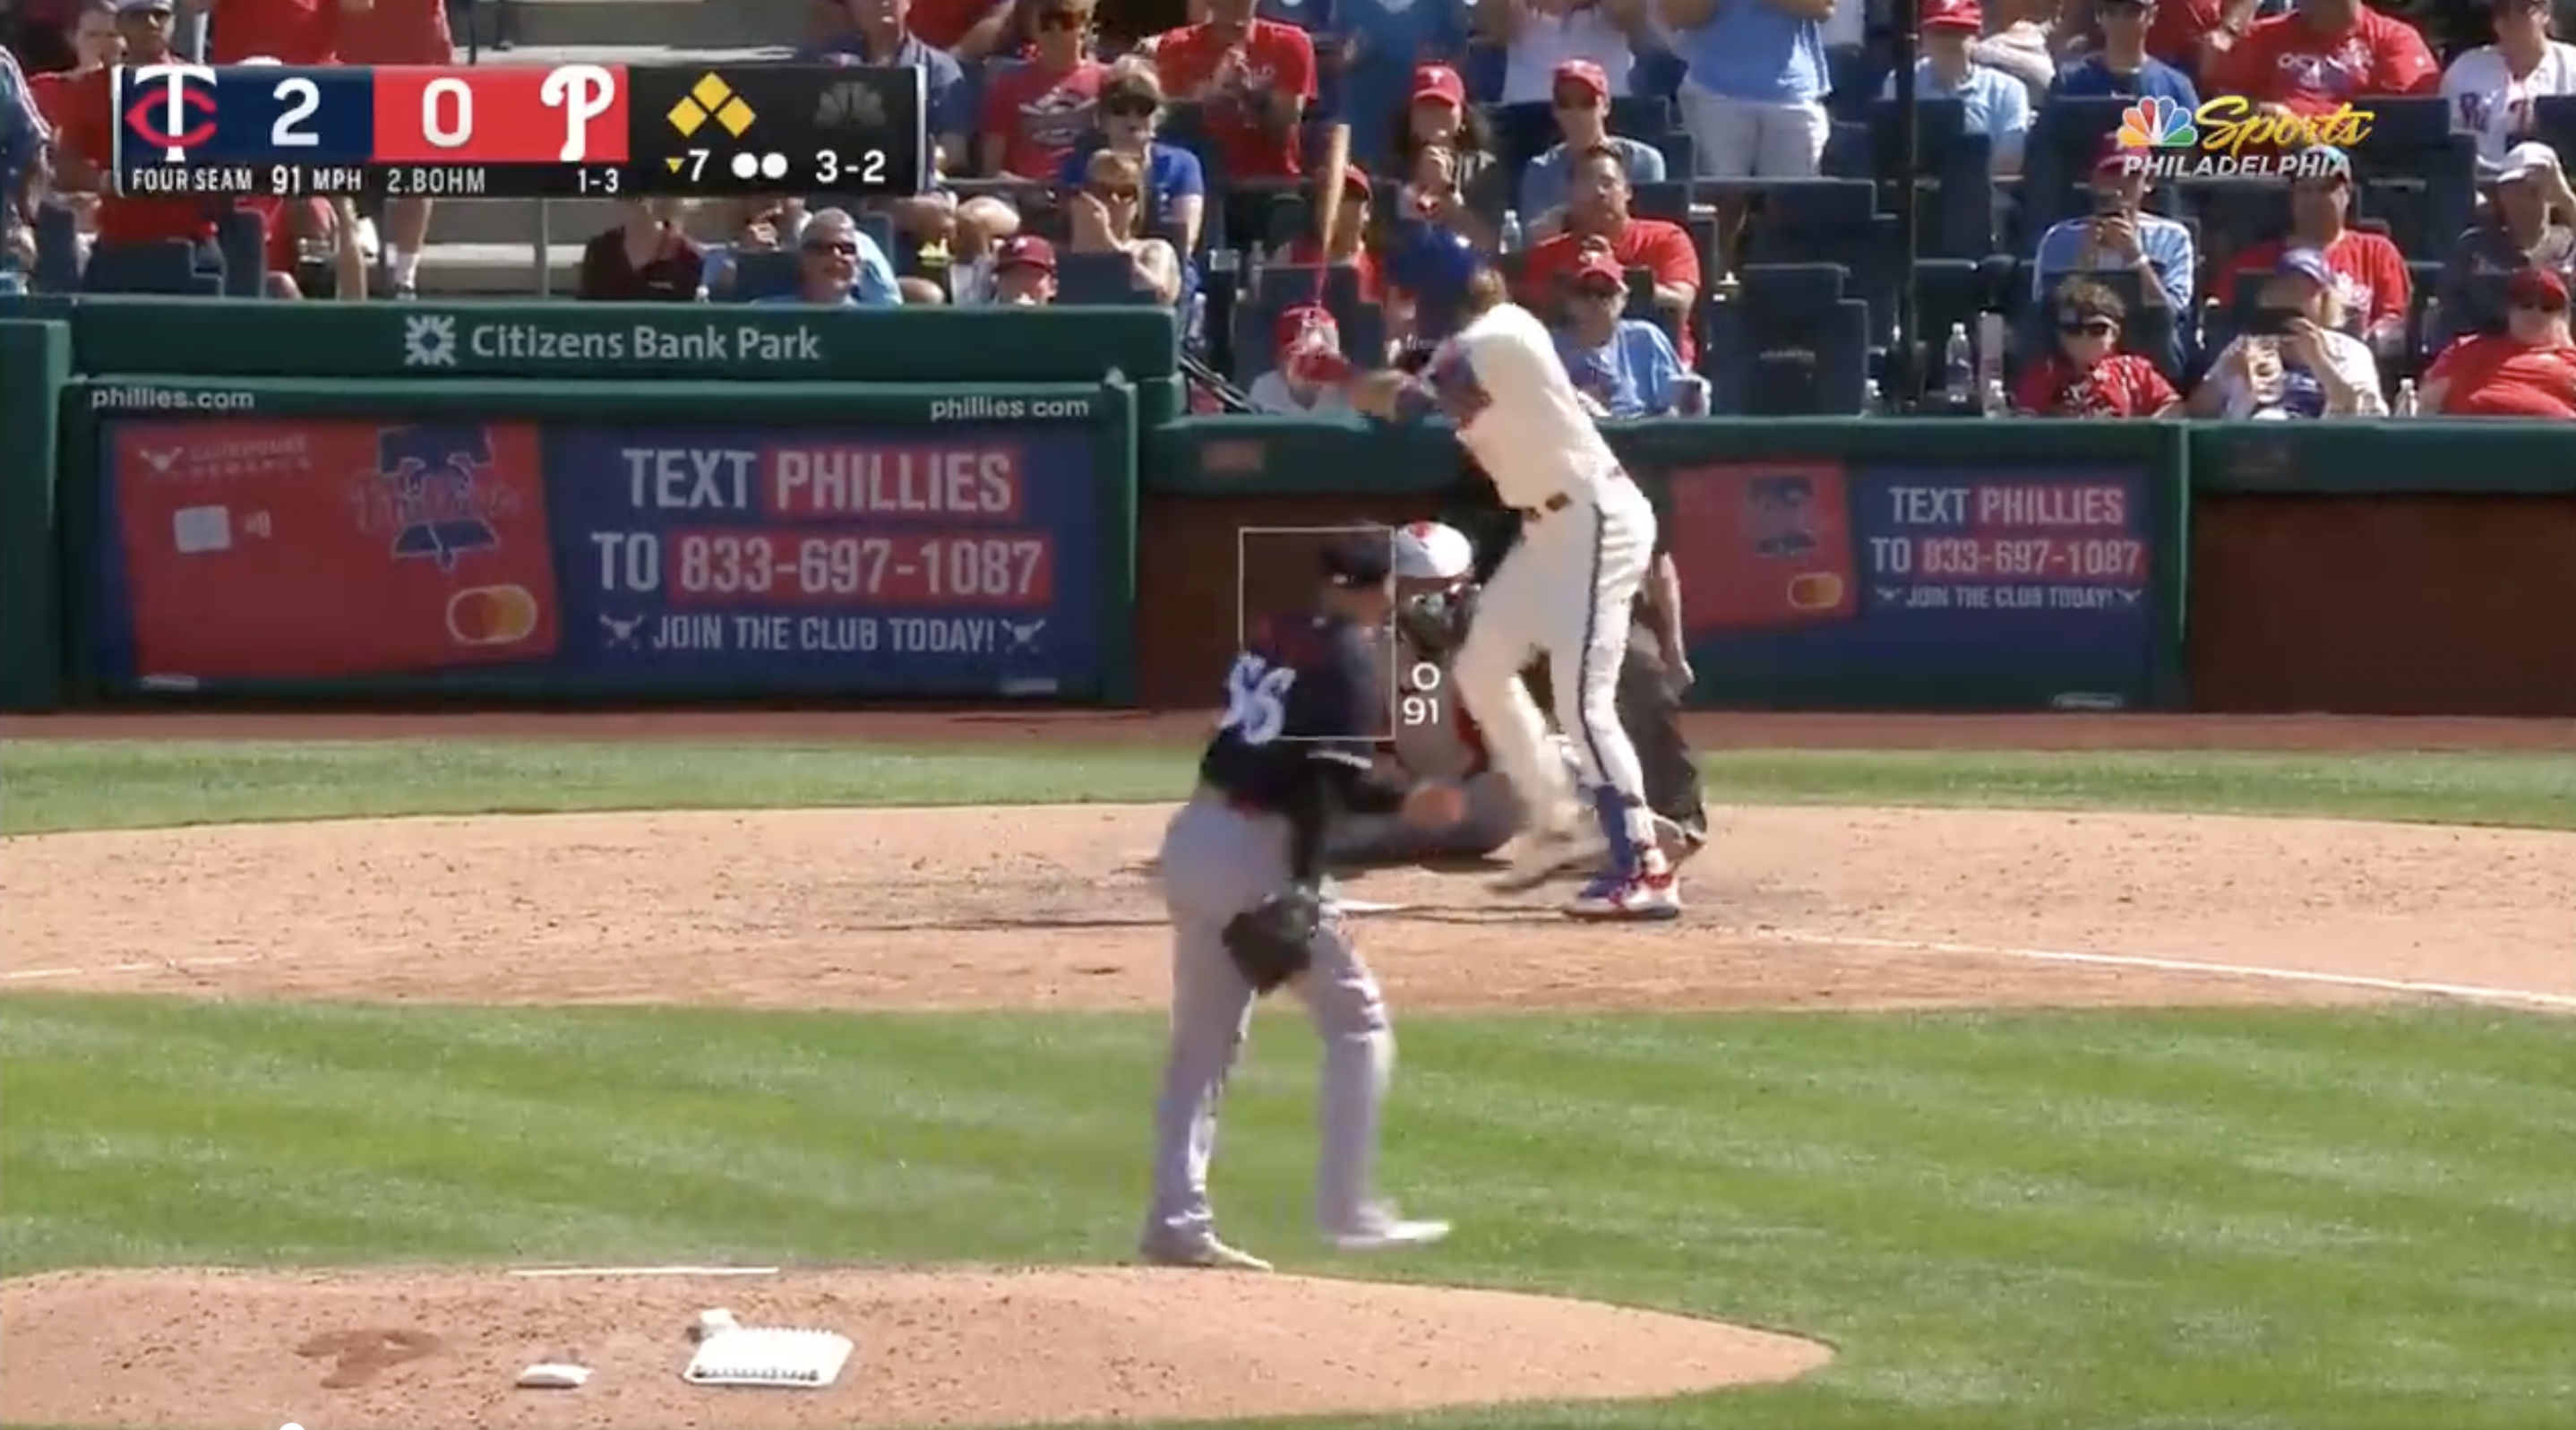 Phillies Alec Bohm gets called out on strikes on a horrible call.